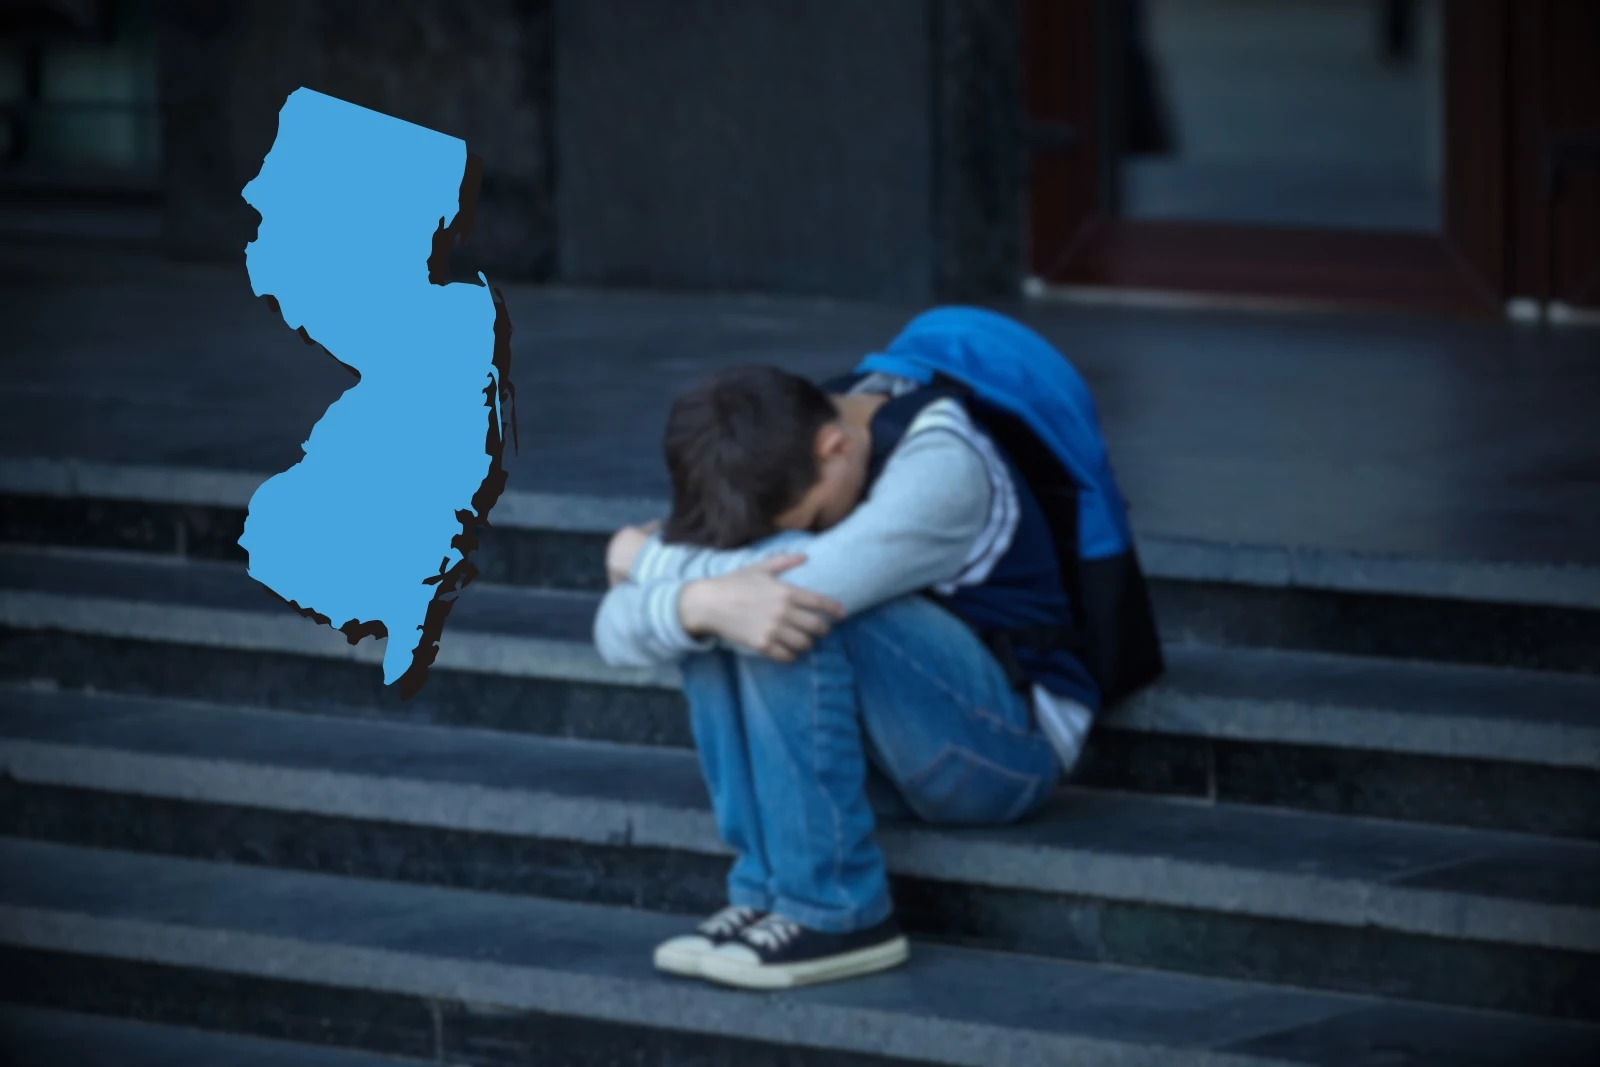 The 30 schools in New Jersey where your child is likely to be the victim of violence